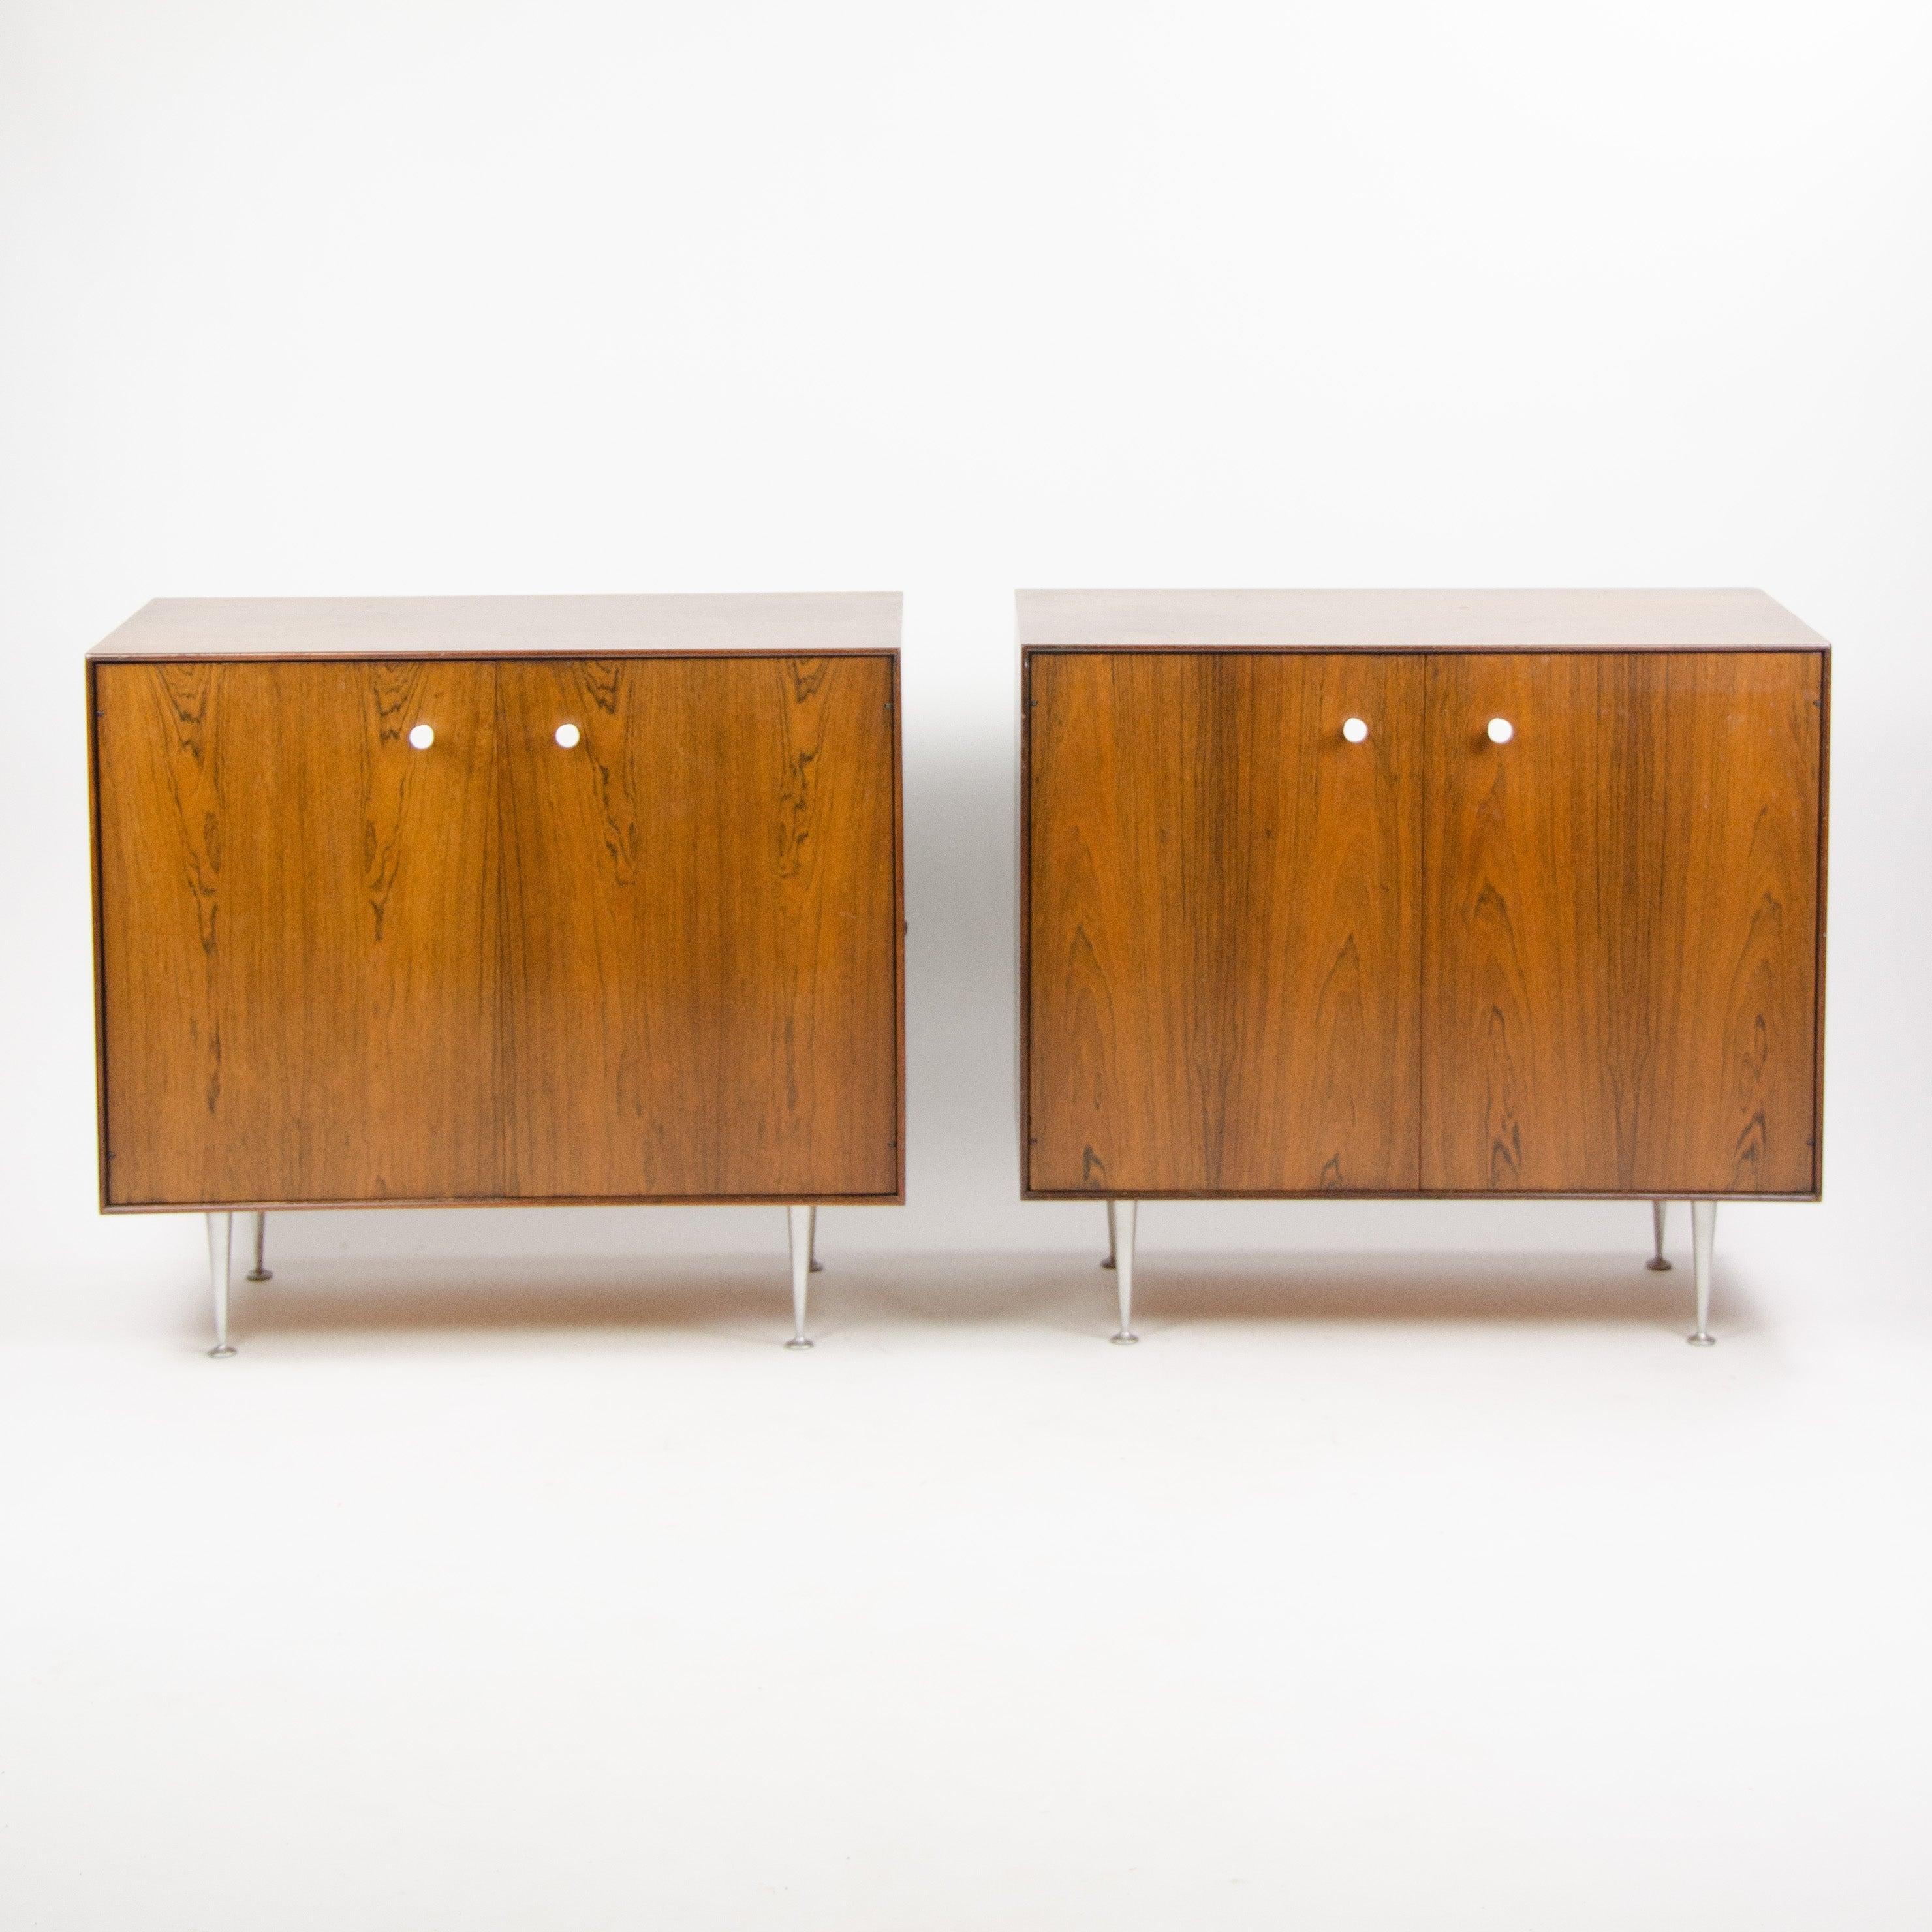 Up for sale is a rare pair of vintage George Nelson for Herman Miller rosewood thin edge cabinets. These cabinets date to the mid 1950's and are some of the earliest examples produced.


The price listed is for one cabinet. Two cabinets are